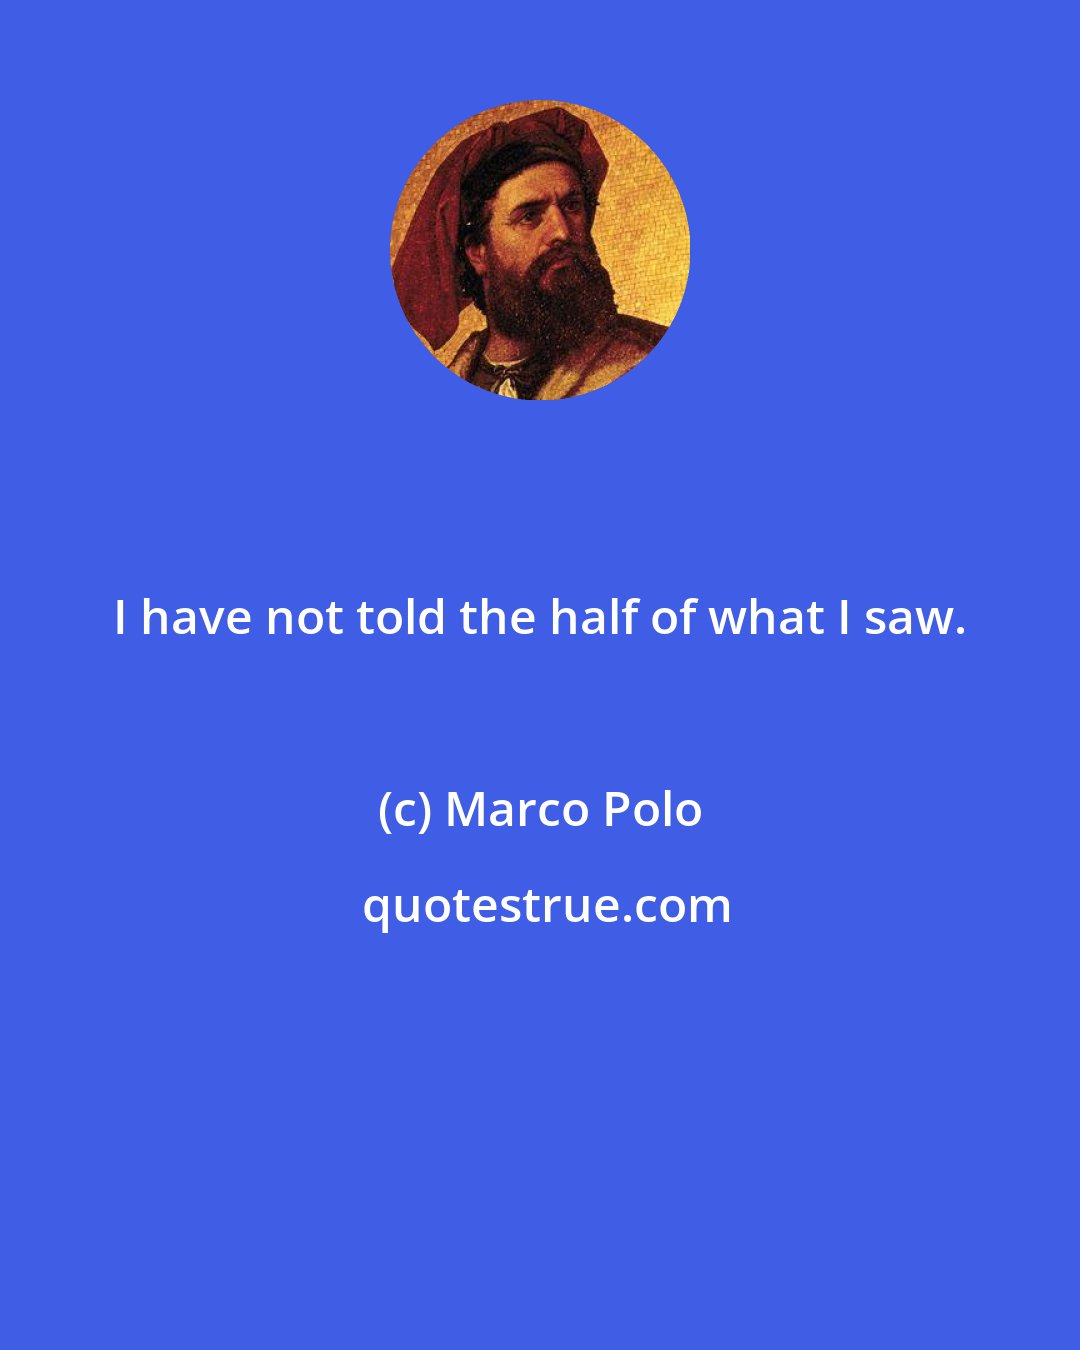 Marco Polo: I have not told the half of what I saw.